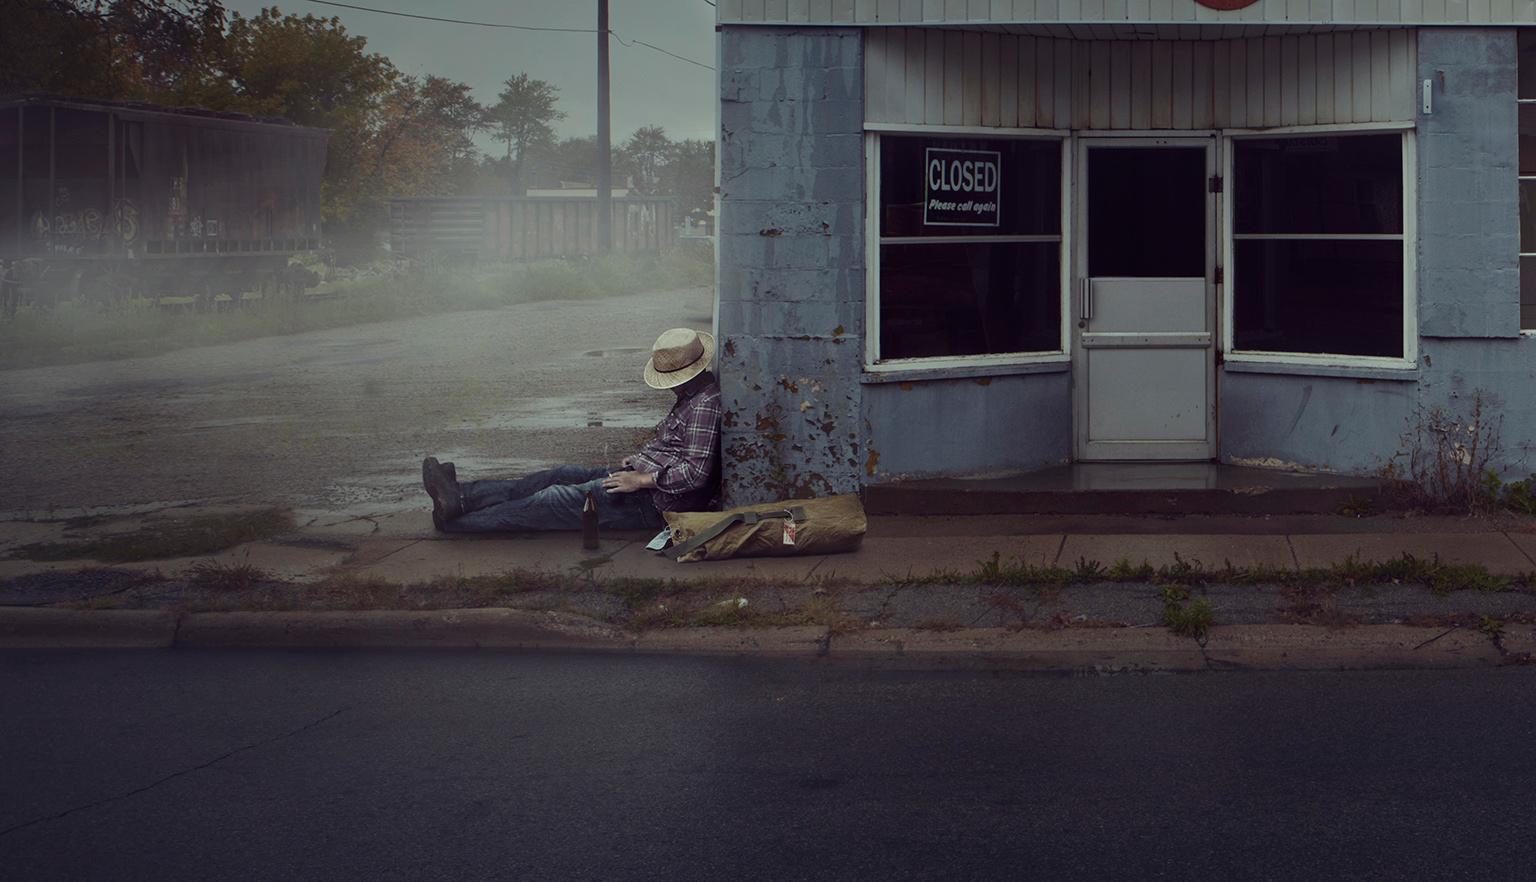 Weary Hobo - Photograph by Tyler Gray